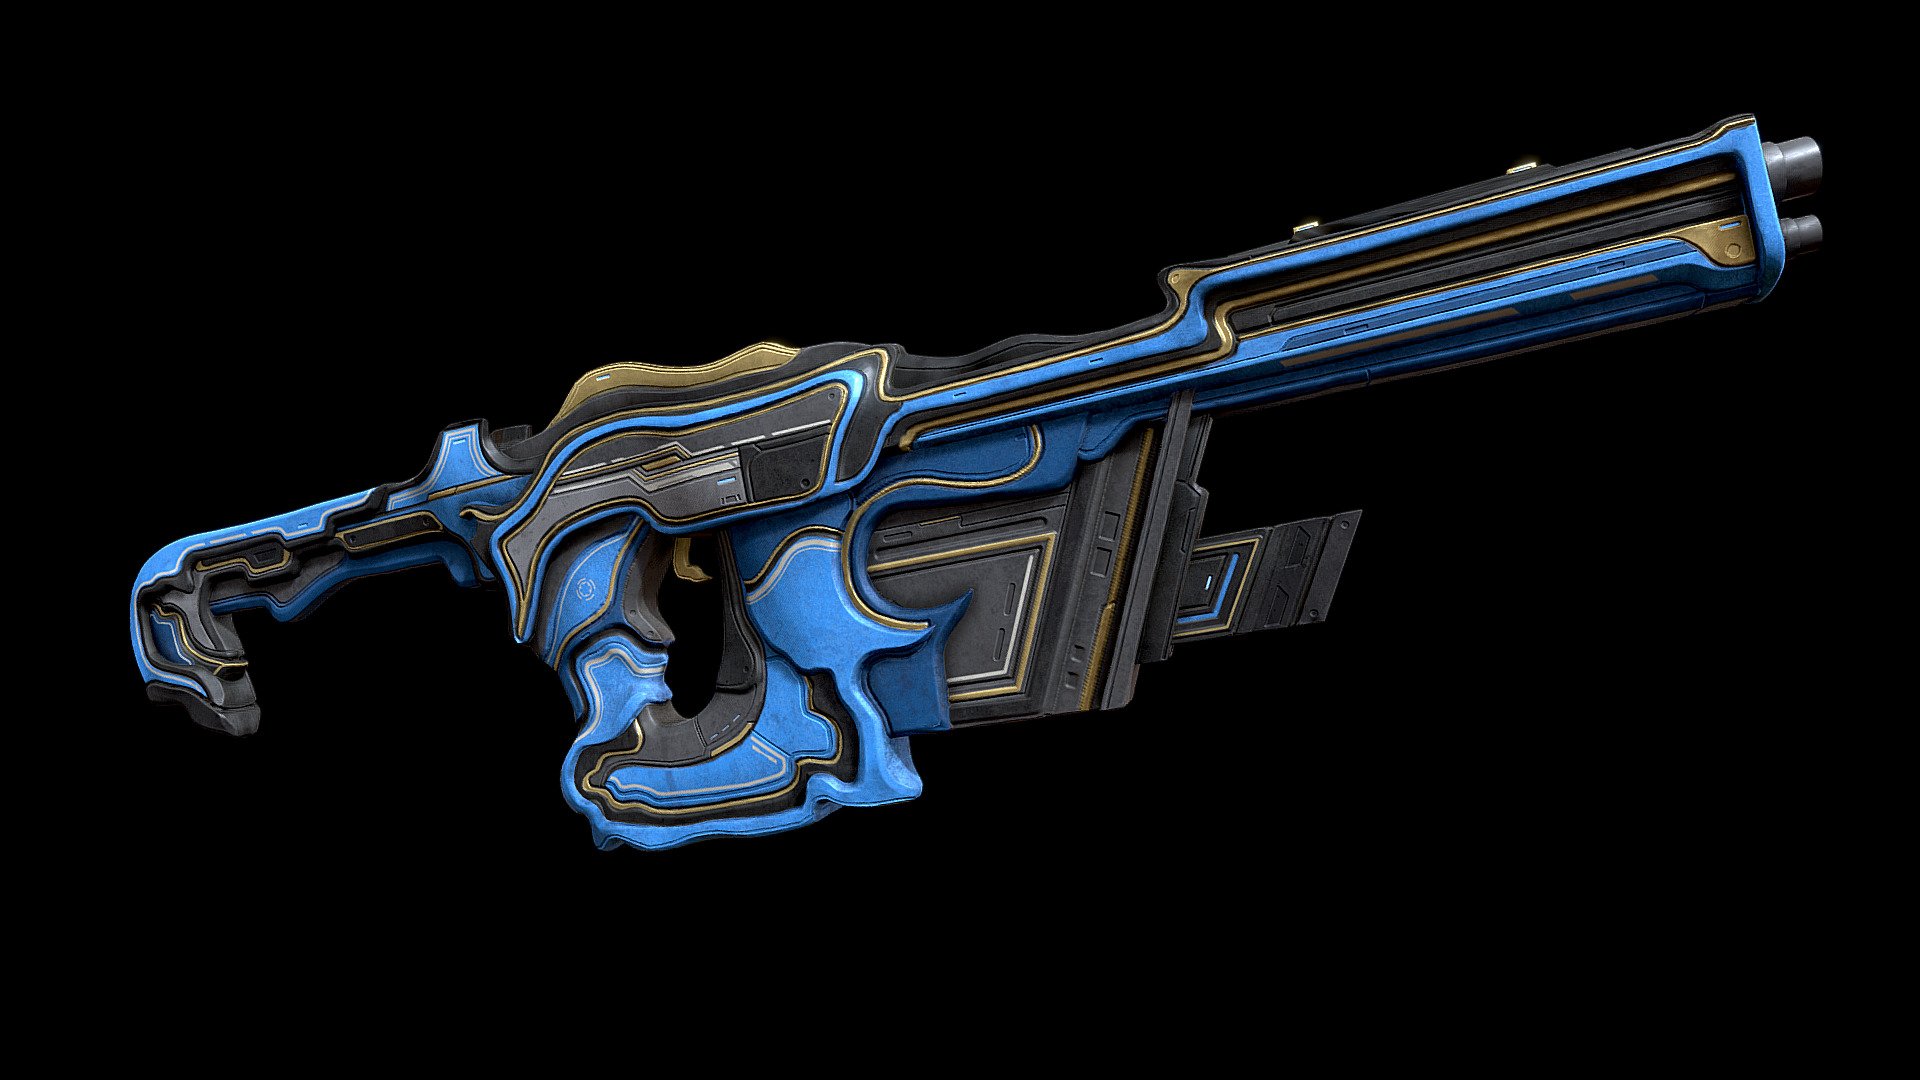 FULL-AUTO RIFLE.4K Texture 50k vertices. Completely free. Follow me for more models like this 3d model